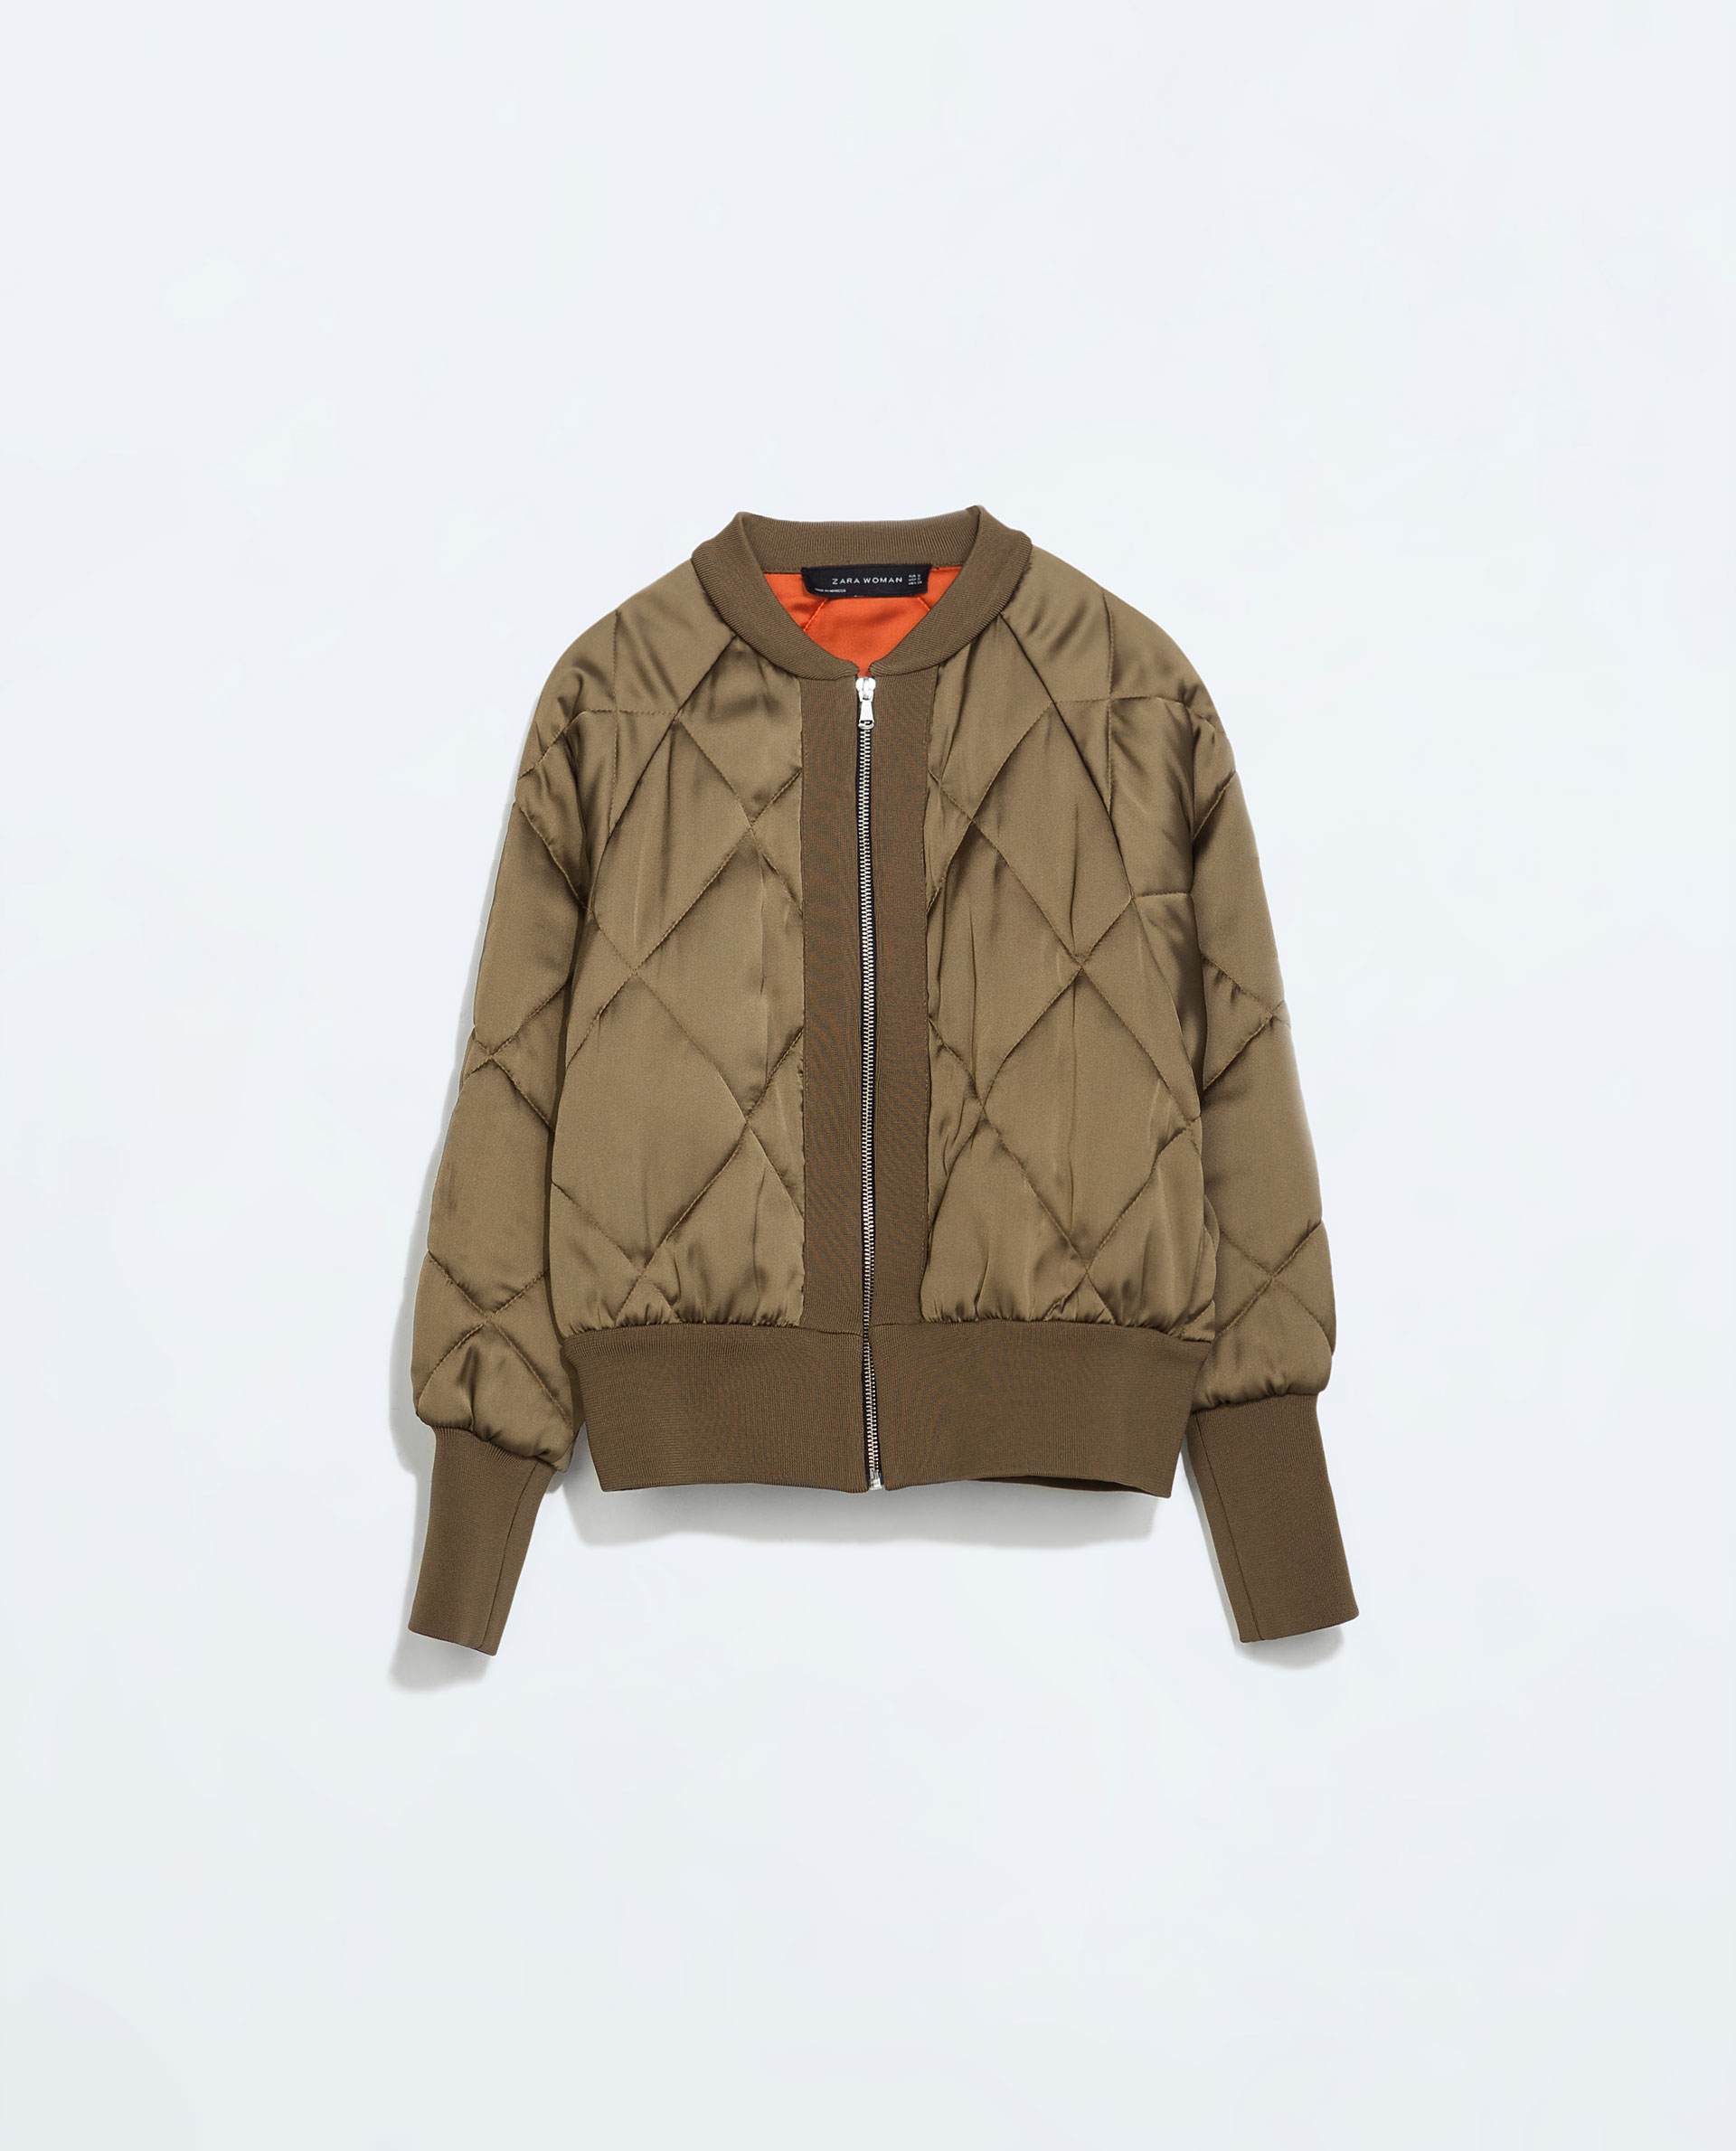 Zara Cropped Quilted Bomber Jacket in Natural | Lyst